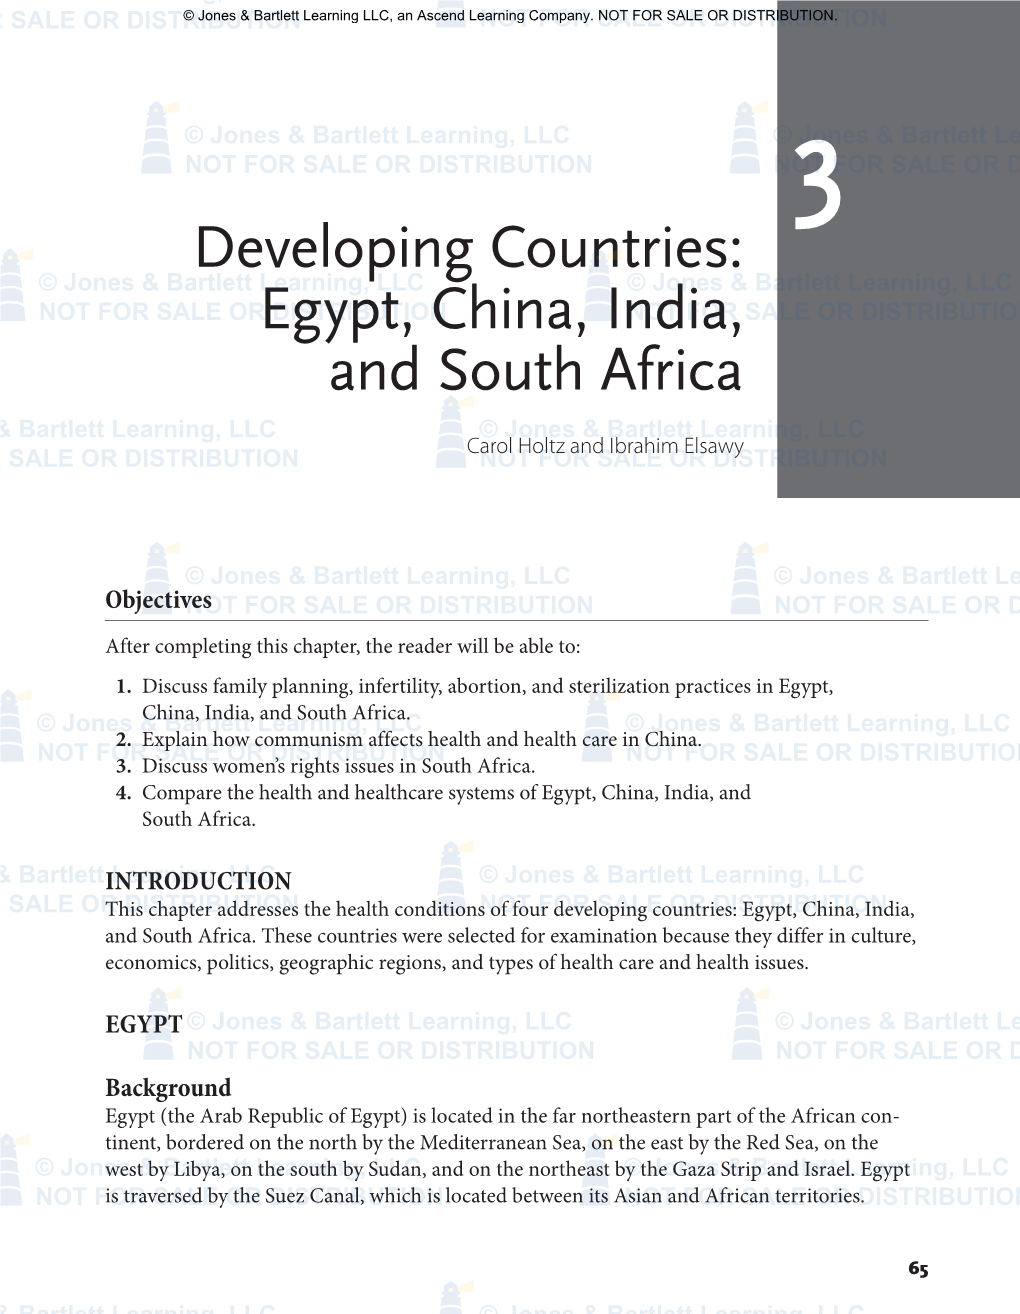 Developing Countries: Egypt, China, India, and South Africa